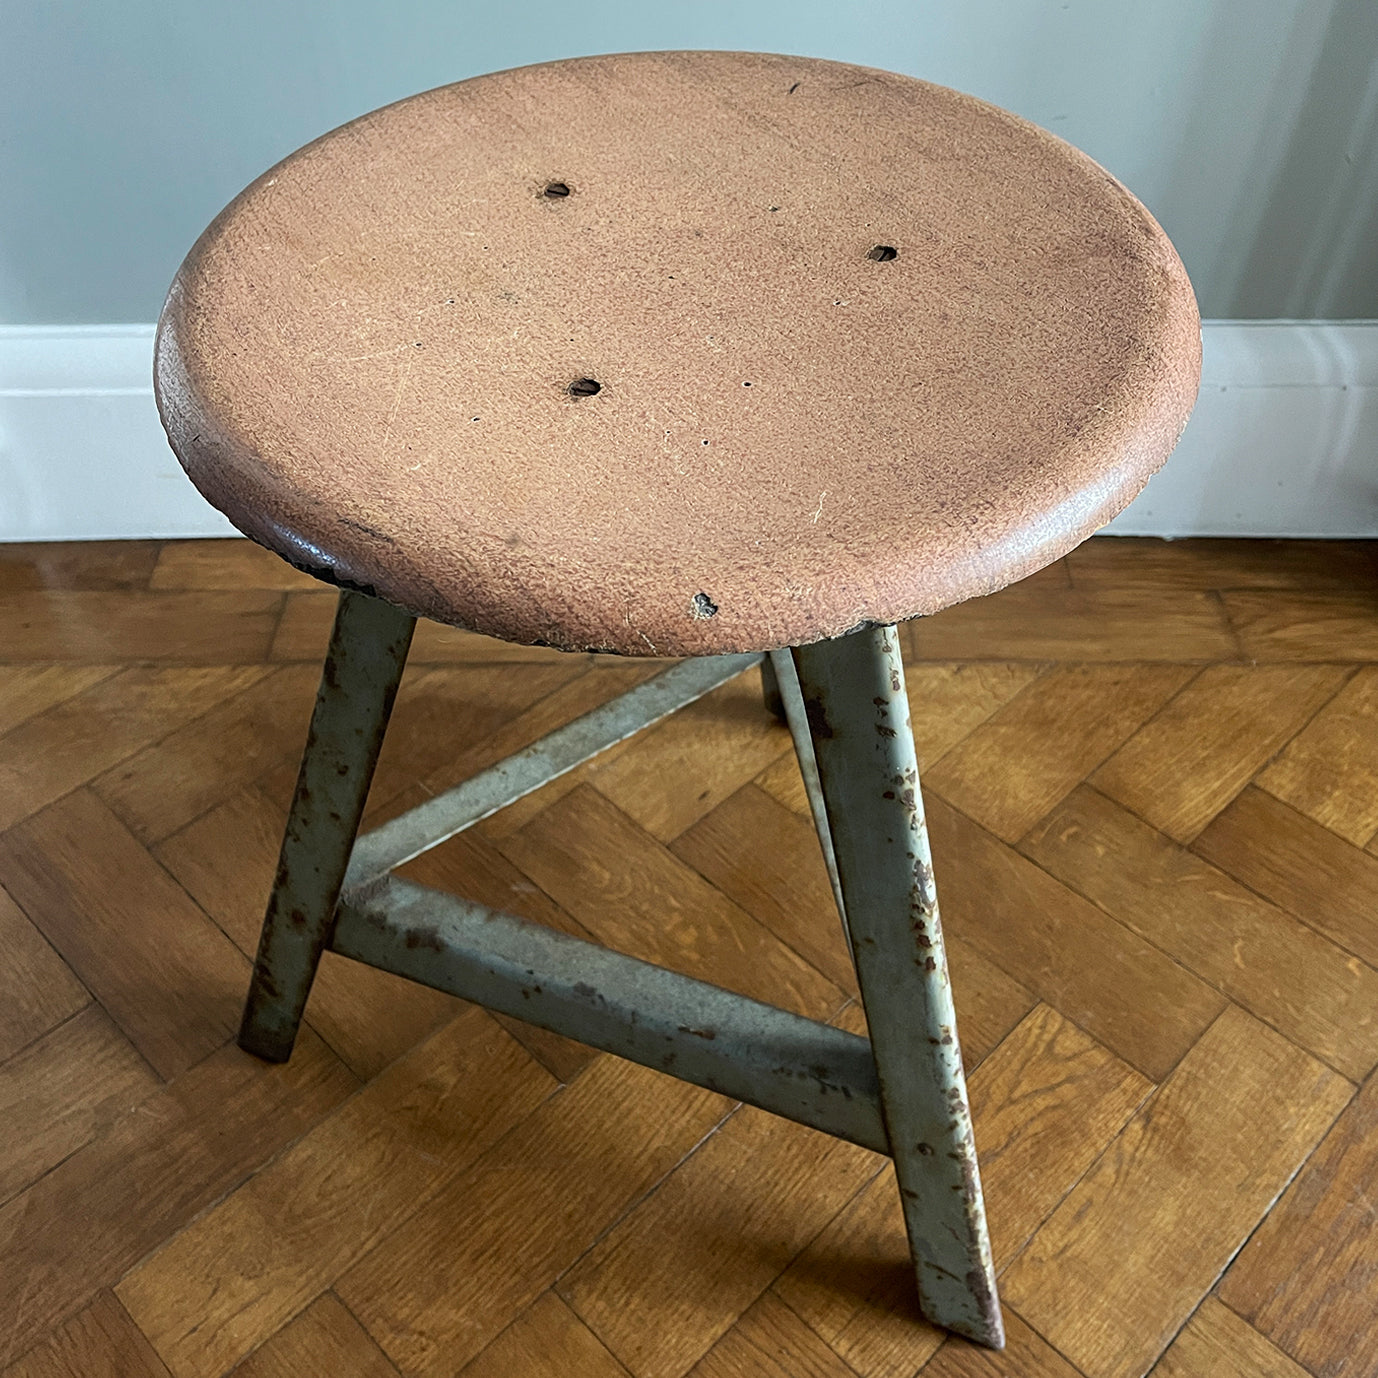 Good looking Vintage Metal and Wood Painted Stool. Great age related wear, patina and totally solid. The light green paint has worn and chipped away giving the stool that bang on look. The wooded seat section has its original painted wood graining paint and shows signs of years of workshop use and ware. A great looking stool that would compliment any setting. 